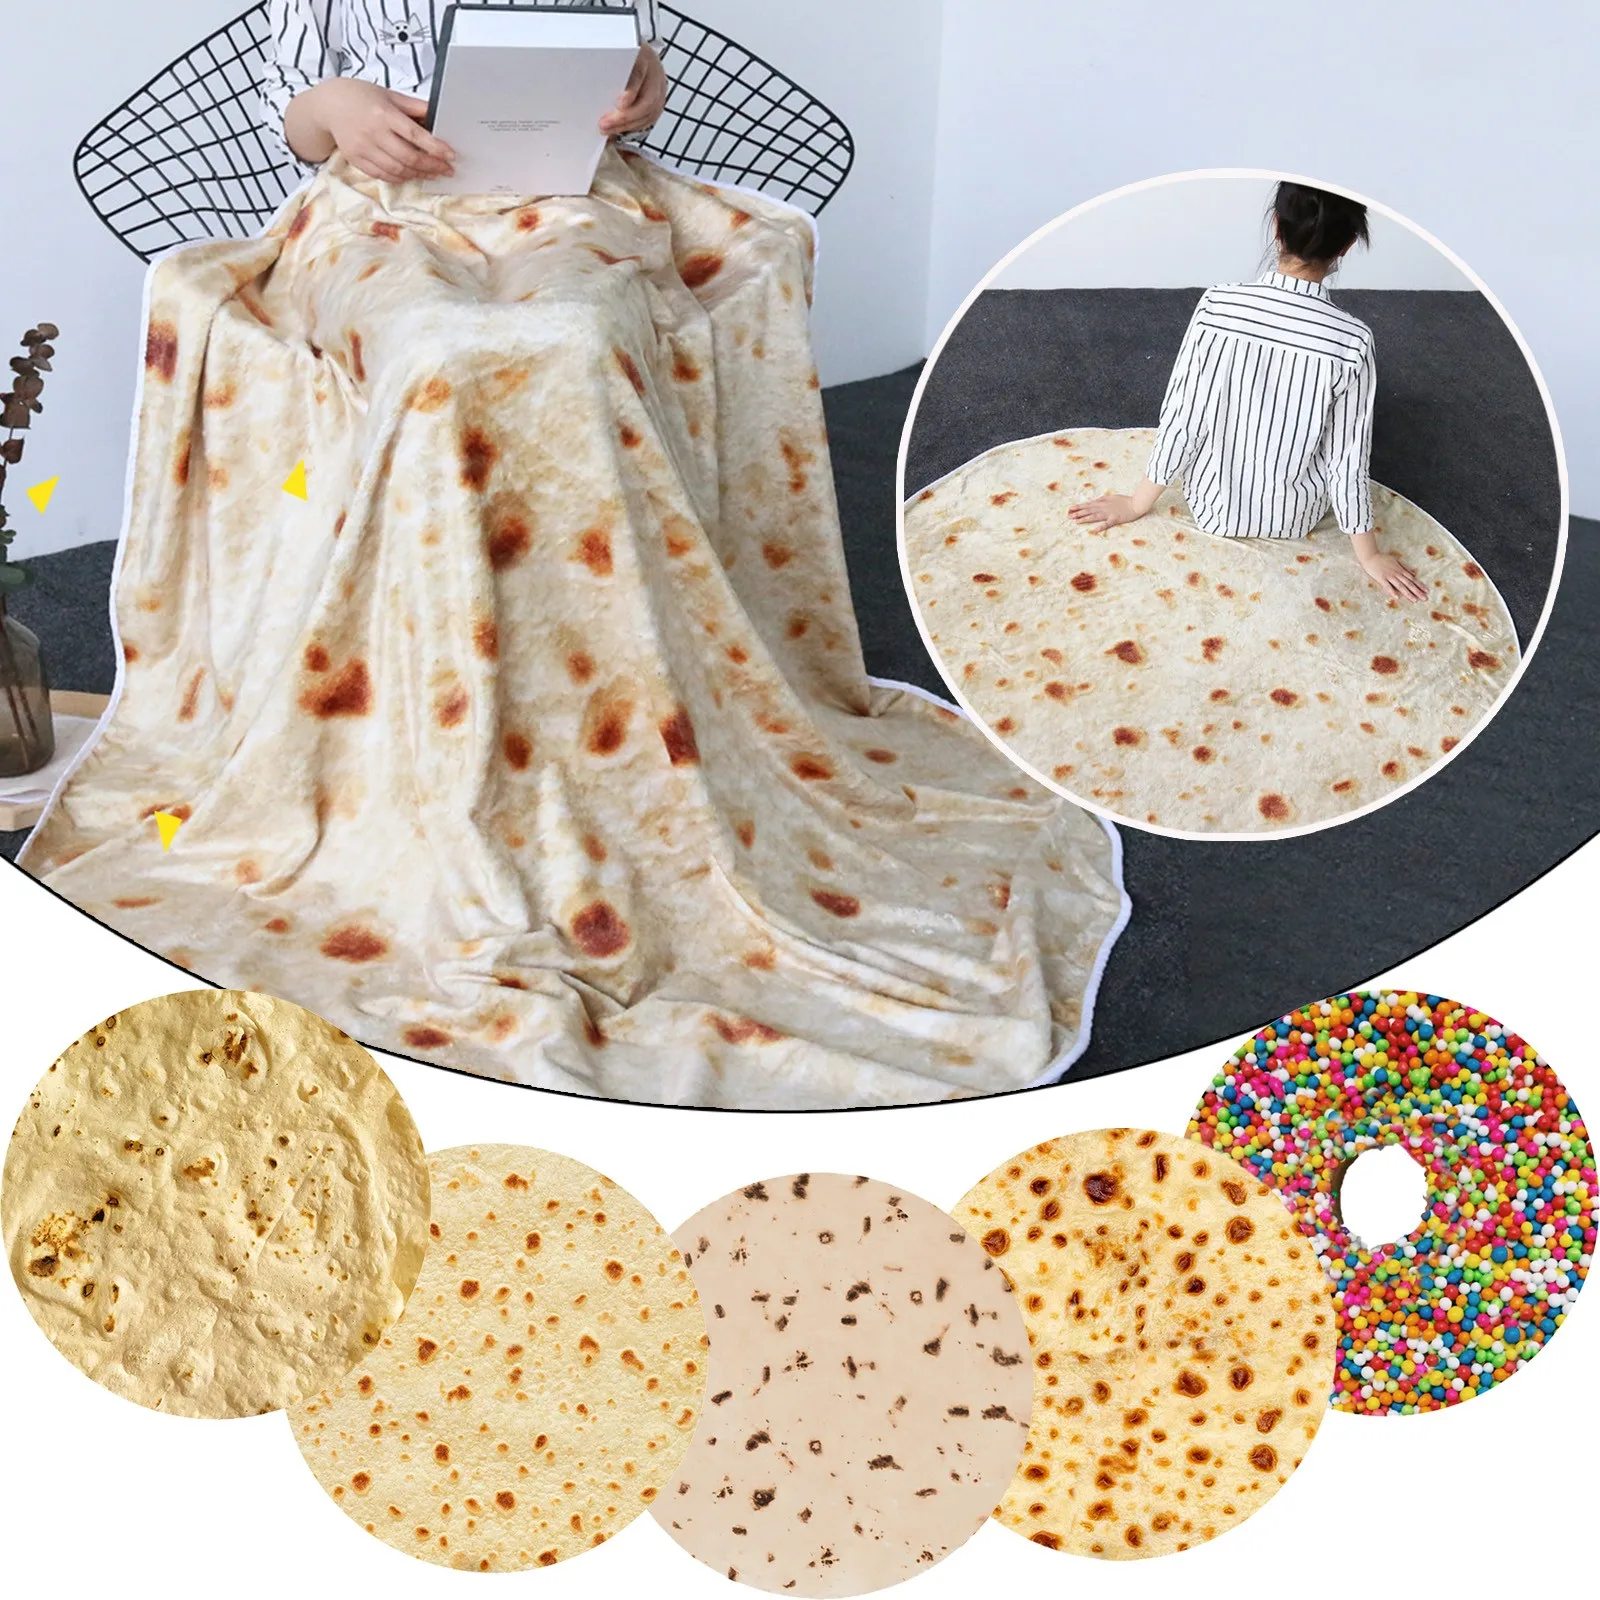 

Realistic Fun Food Taco Burrito Tortilla Blanket Soft Warm Flannel Throw Blankets Plush Bed Cover Novelty Gifts for Adult Child